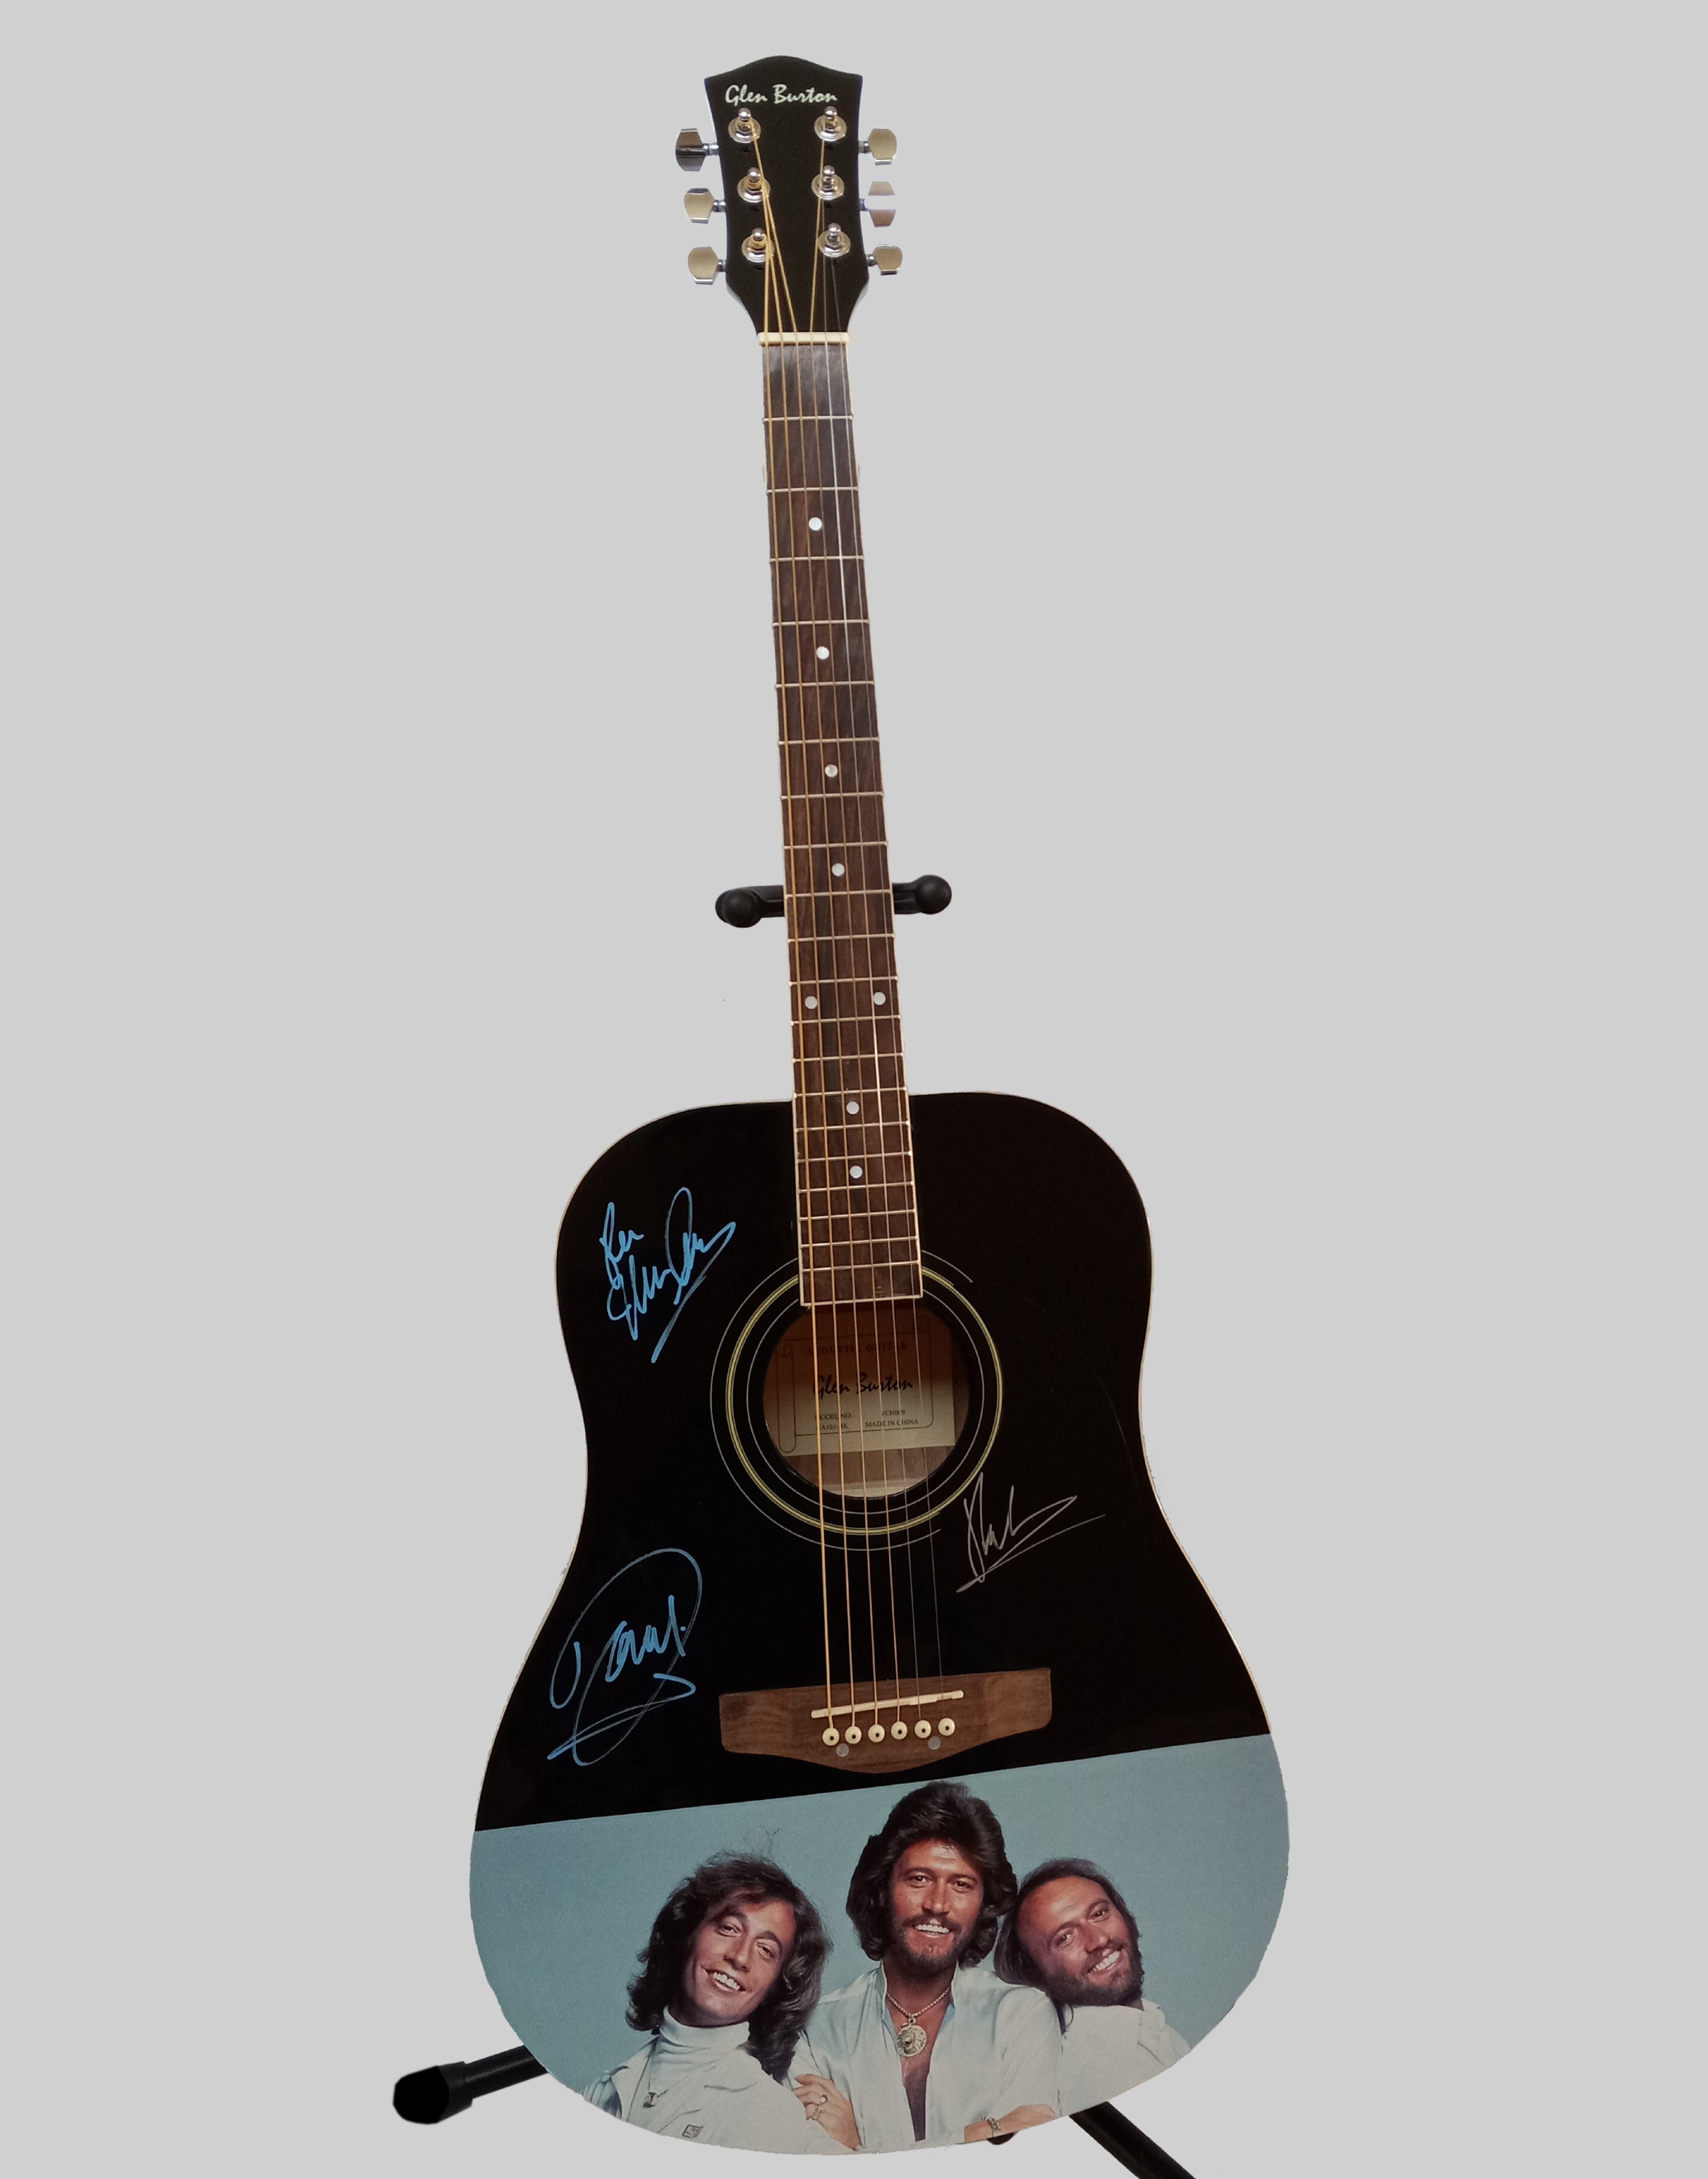 Barry, Robin and Maurice Gibb the Bee Gees one of a kind guitar signed with proof